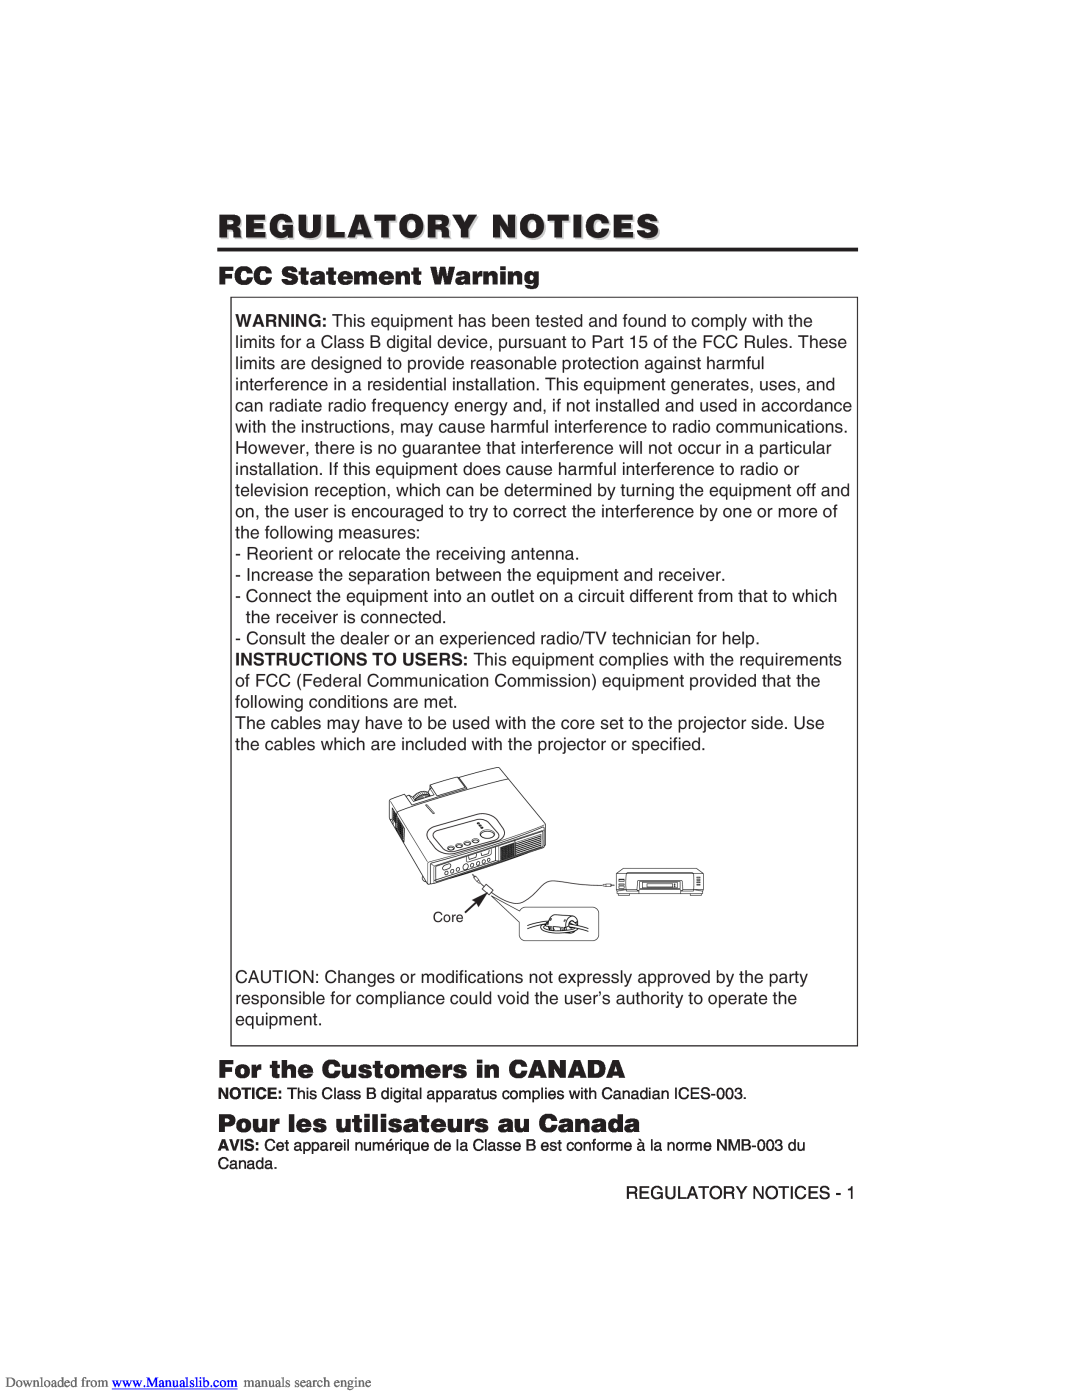 Hitachi CP-X275W Regulatory Notices, FCC Statement Warning, For the Customers in CANADA, Pour les utilisateurs au Canada 